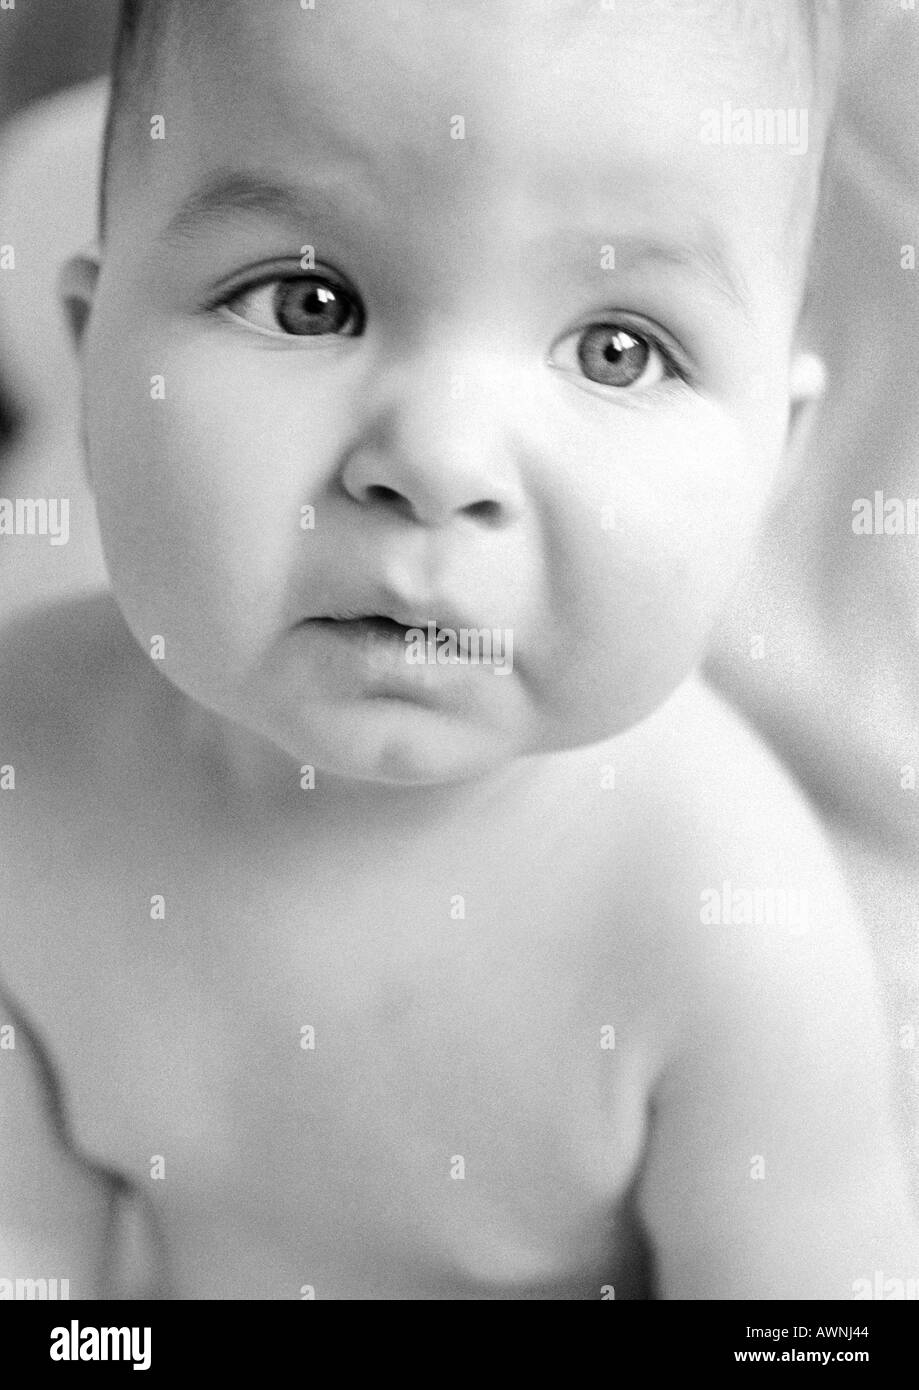 Baby looking up, close-up, B&W. Stock Photo